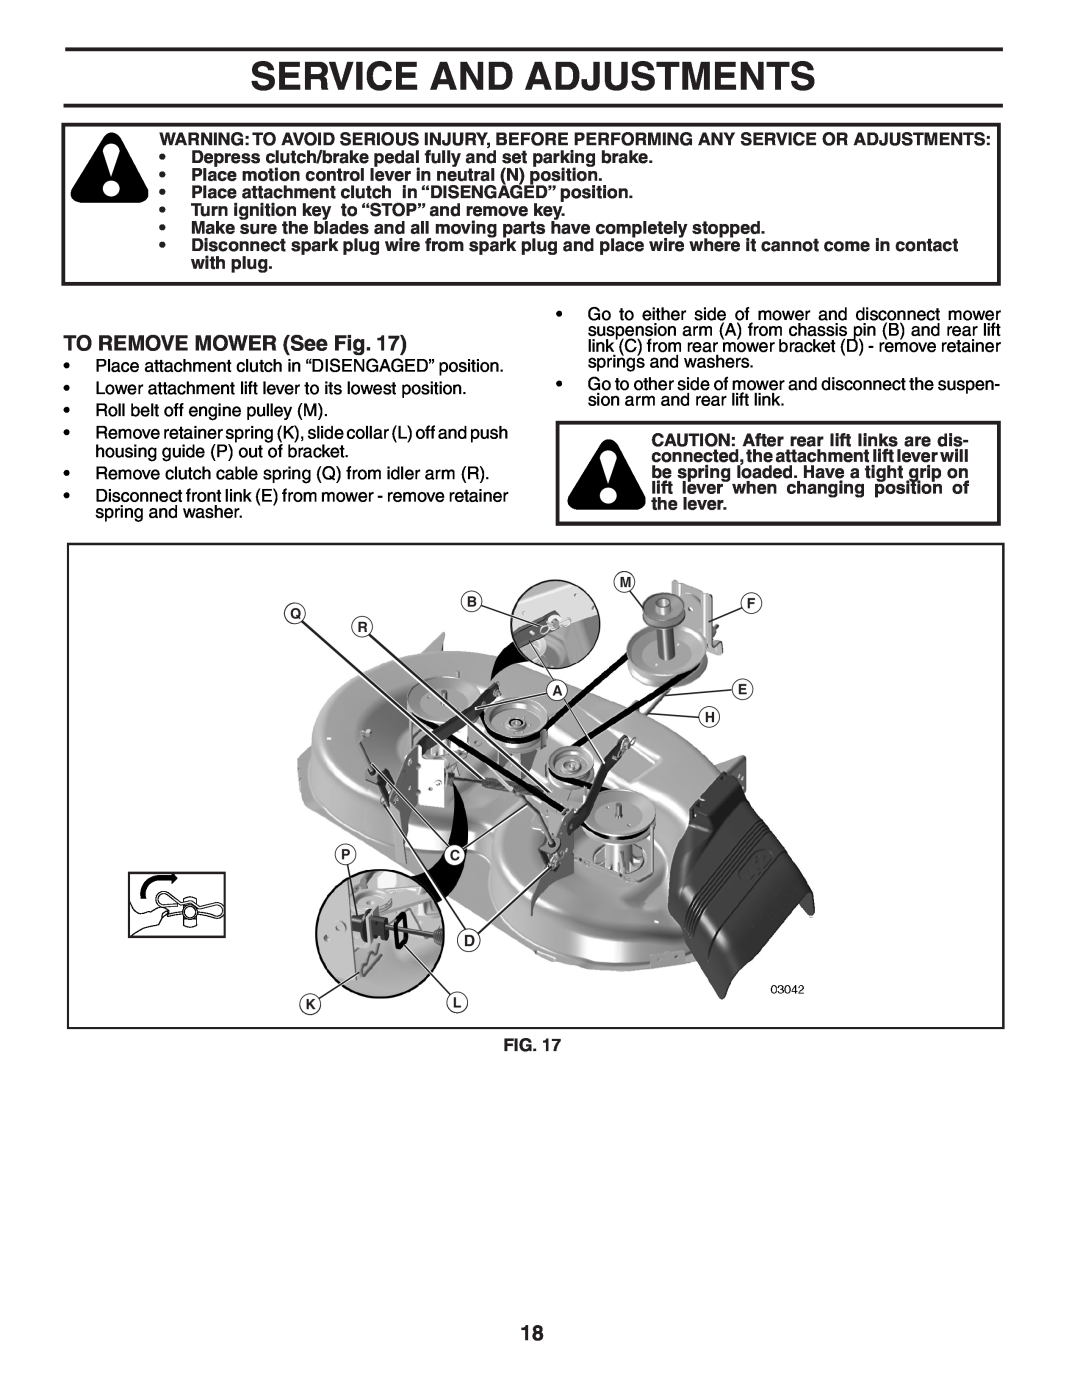 Poulan PB20H42YT manual Service And Adjustments, TO REMOVE MOWER See Fig, Place motion control lever in neutral N position 